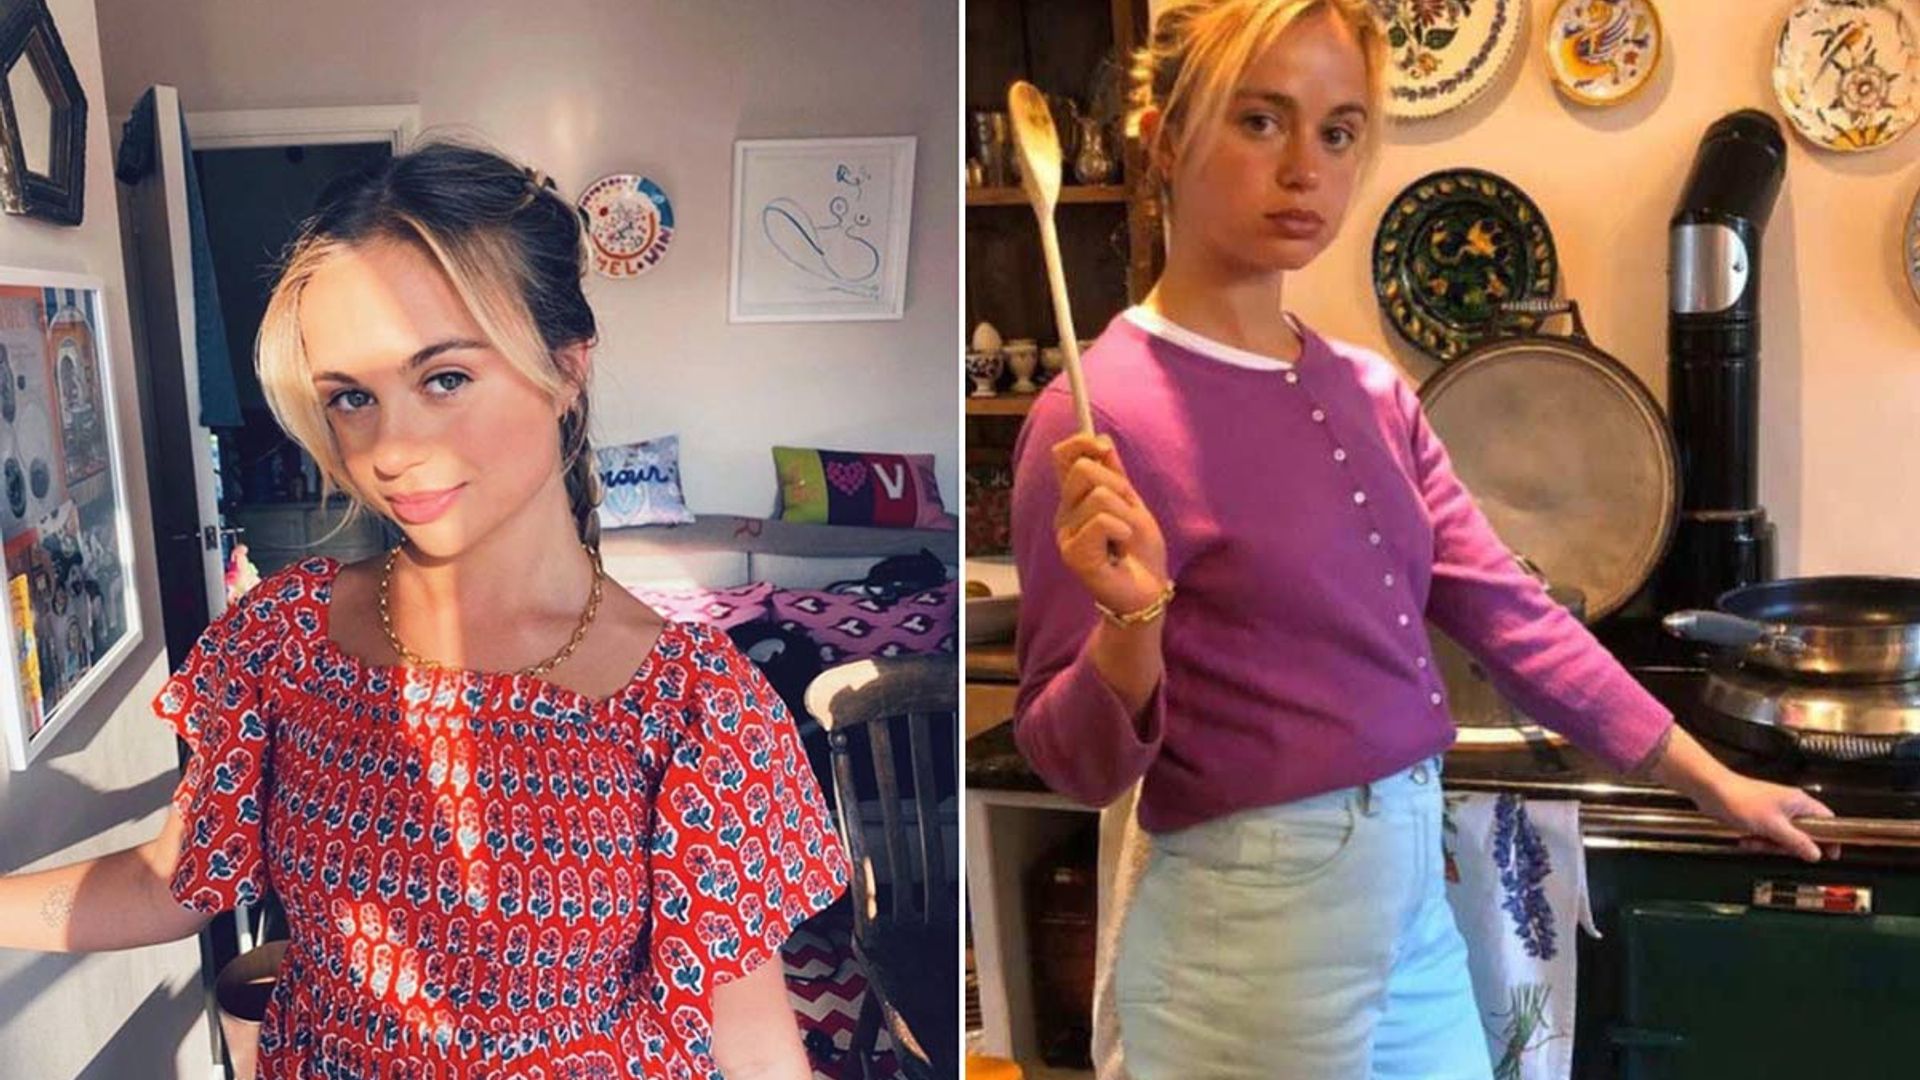 Prince William's cousin Lady Amelia Windsor's 'small' London flat share – see inside